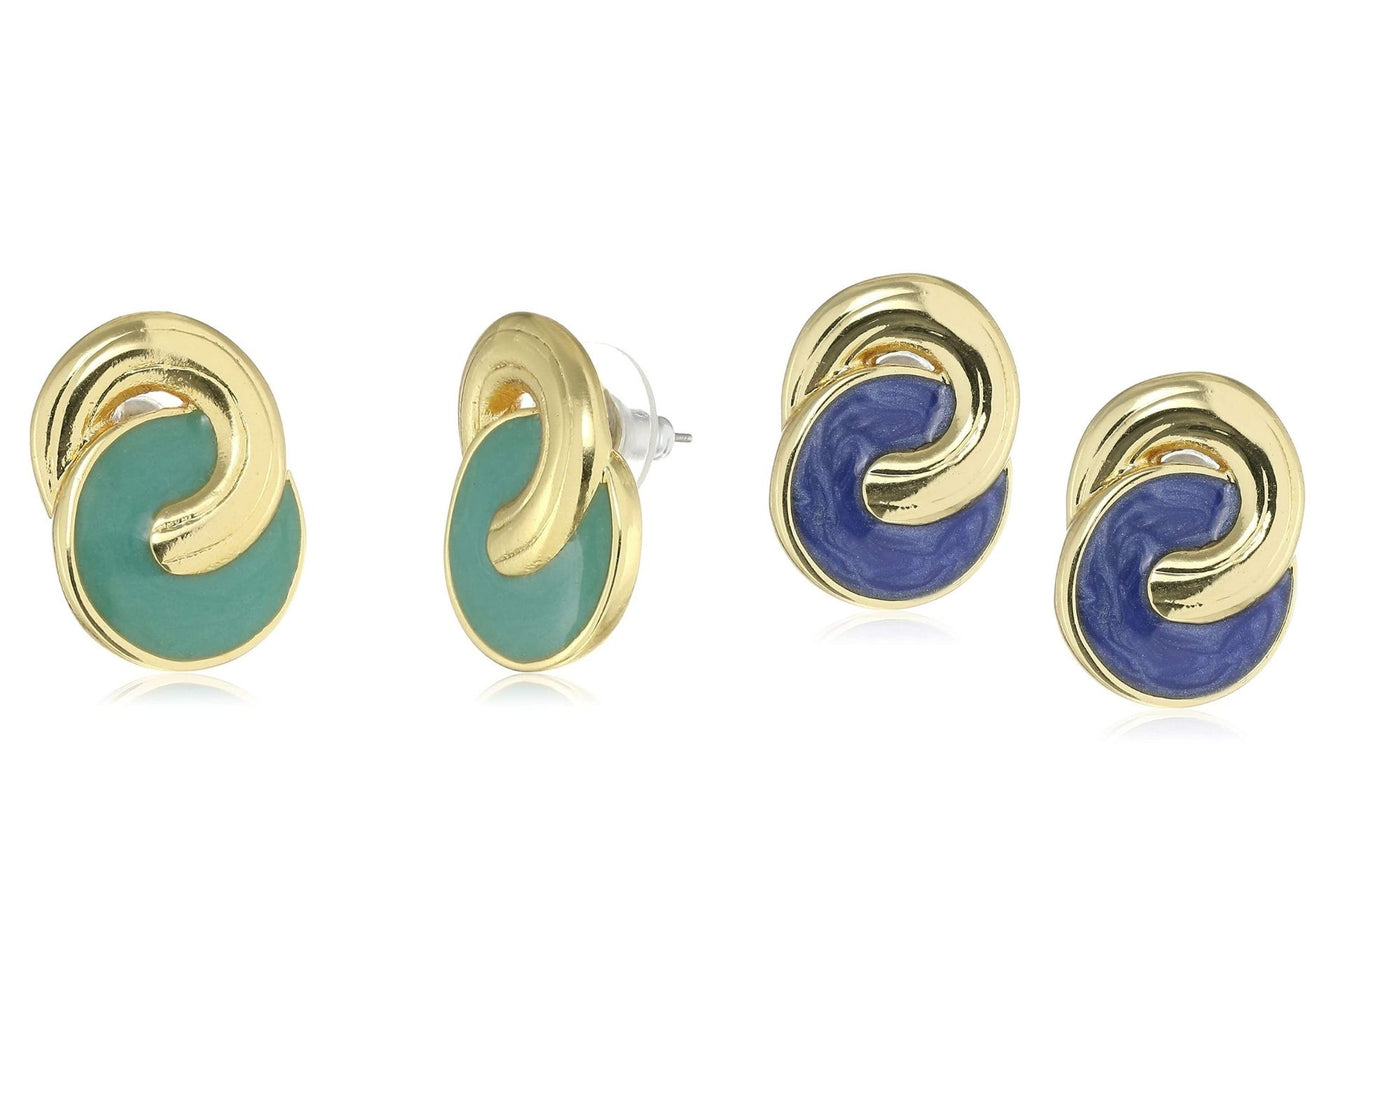 Estele Valentines Day Special Earrings - Gold Plated Enamel Round Stud Earrings For Girls & Women(RED & BLUE)